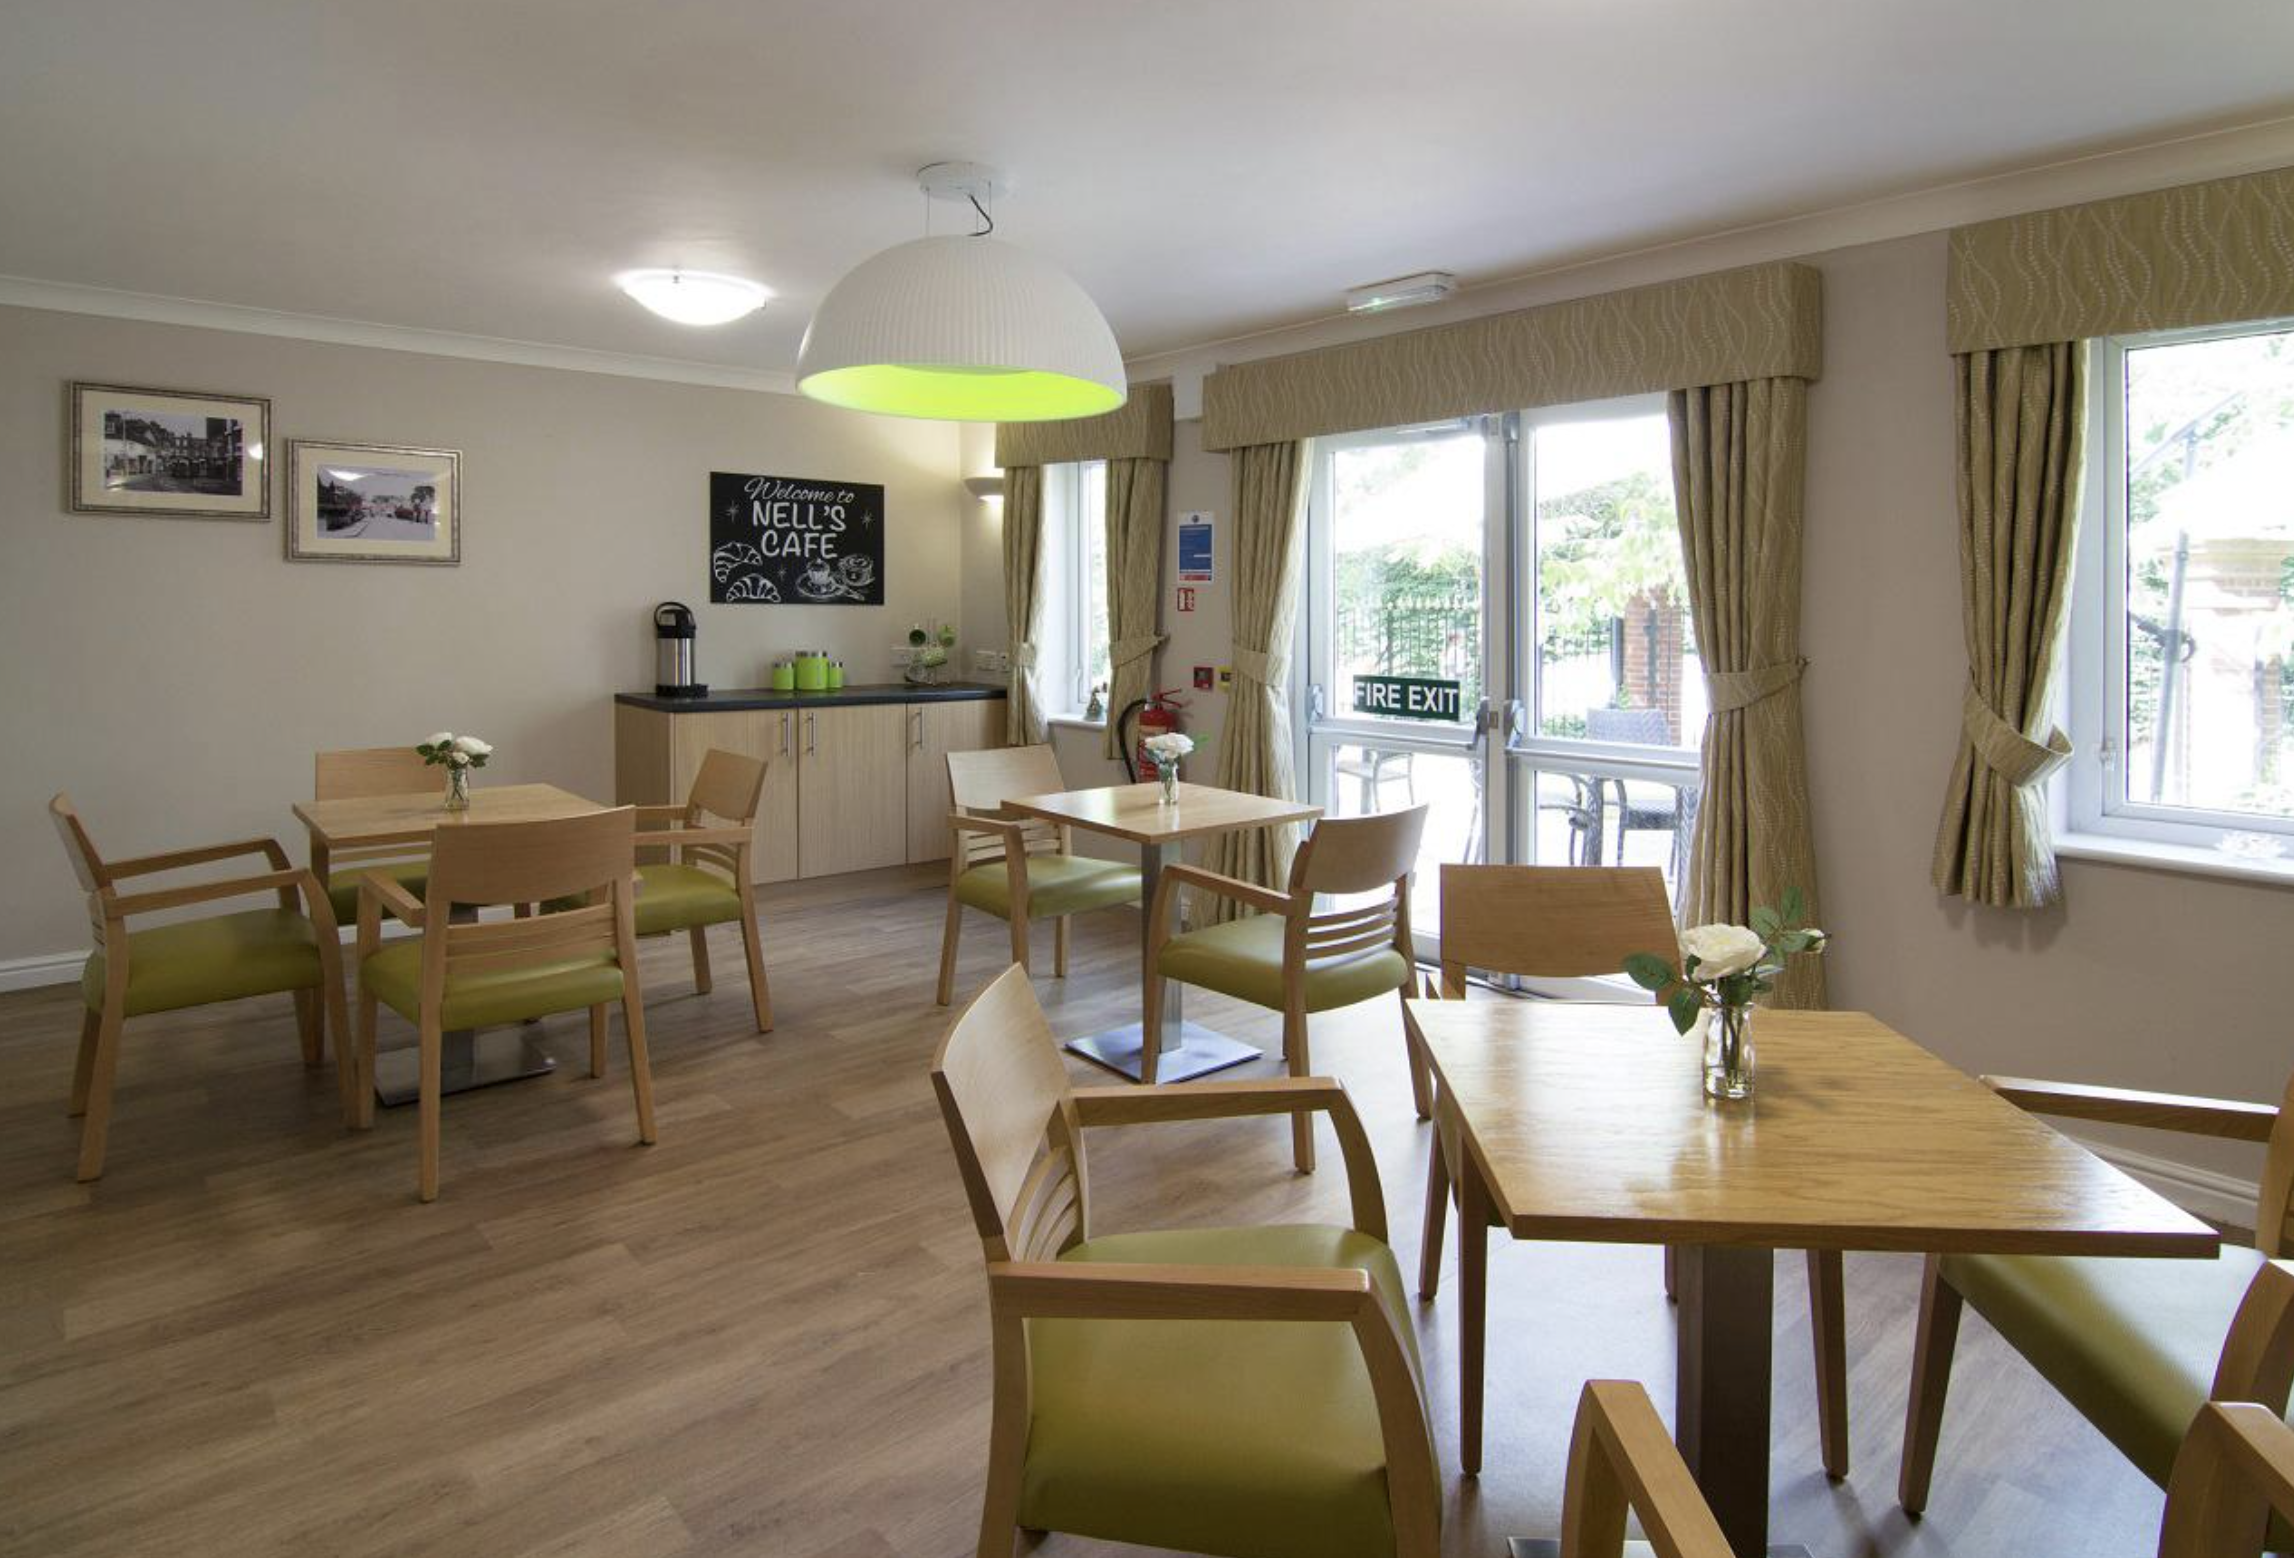 Dining room of Abbotsleigh Mews care home in Sidcup, Greater London